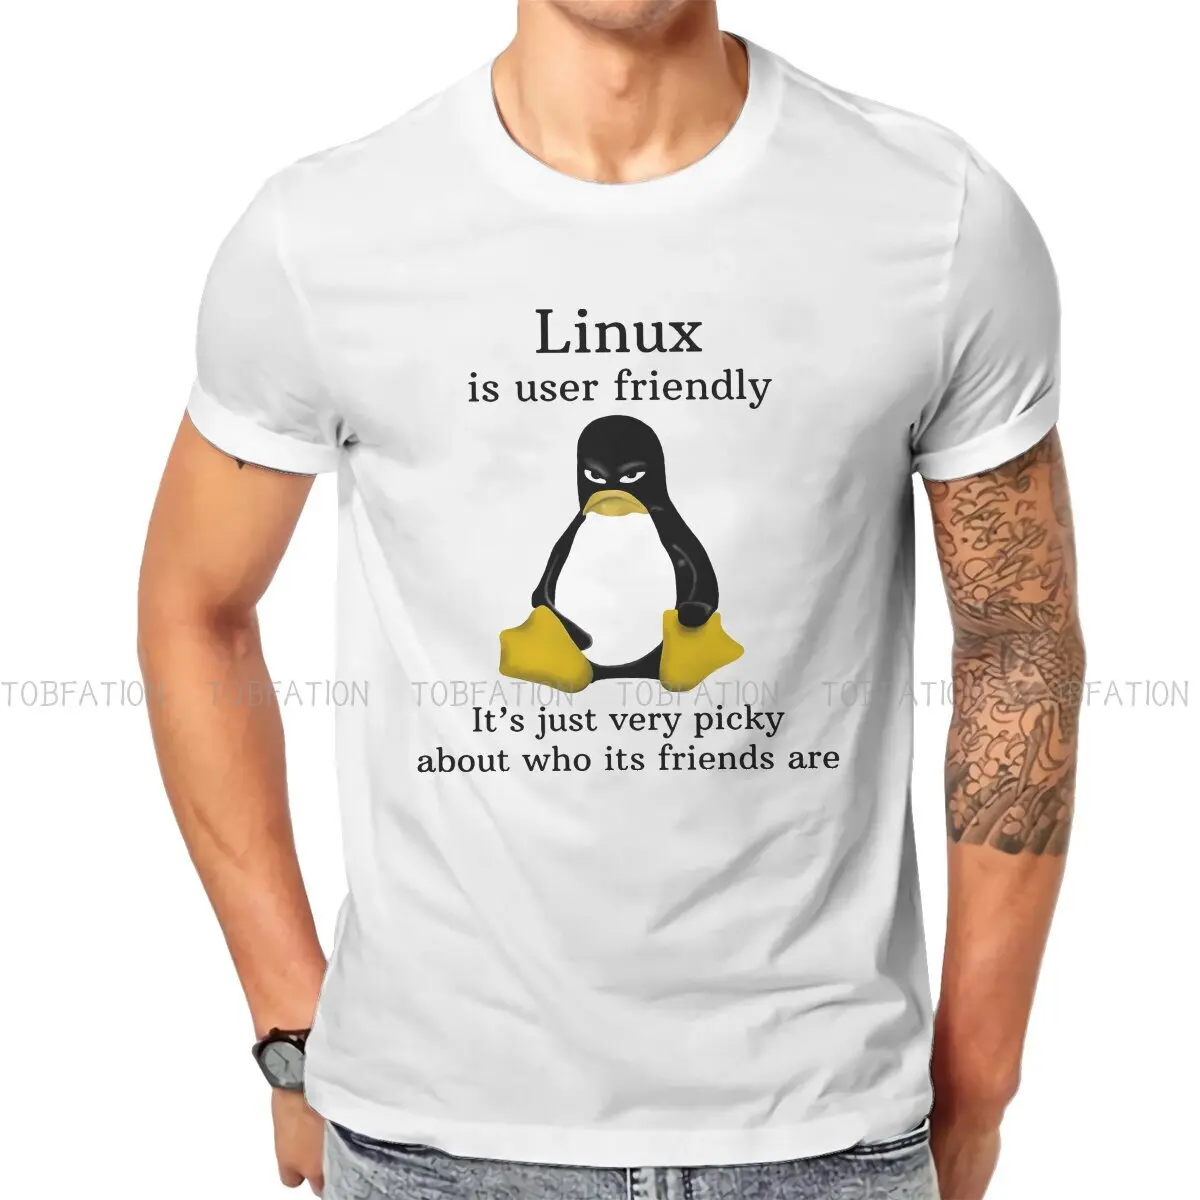 

User Friendly Just Picky Man's TShirt Linux Operating System Tux Penguin O Neck Short Sleeve Polyester T Shirt Funny Gift Idea